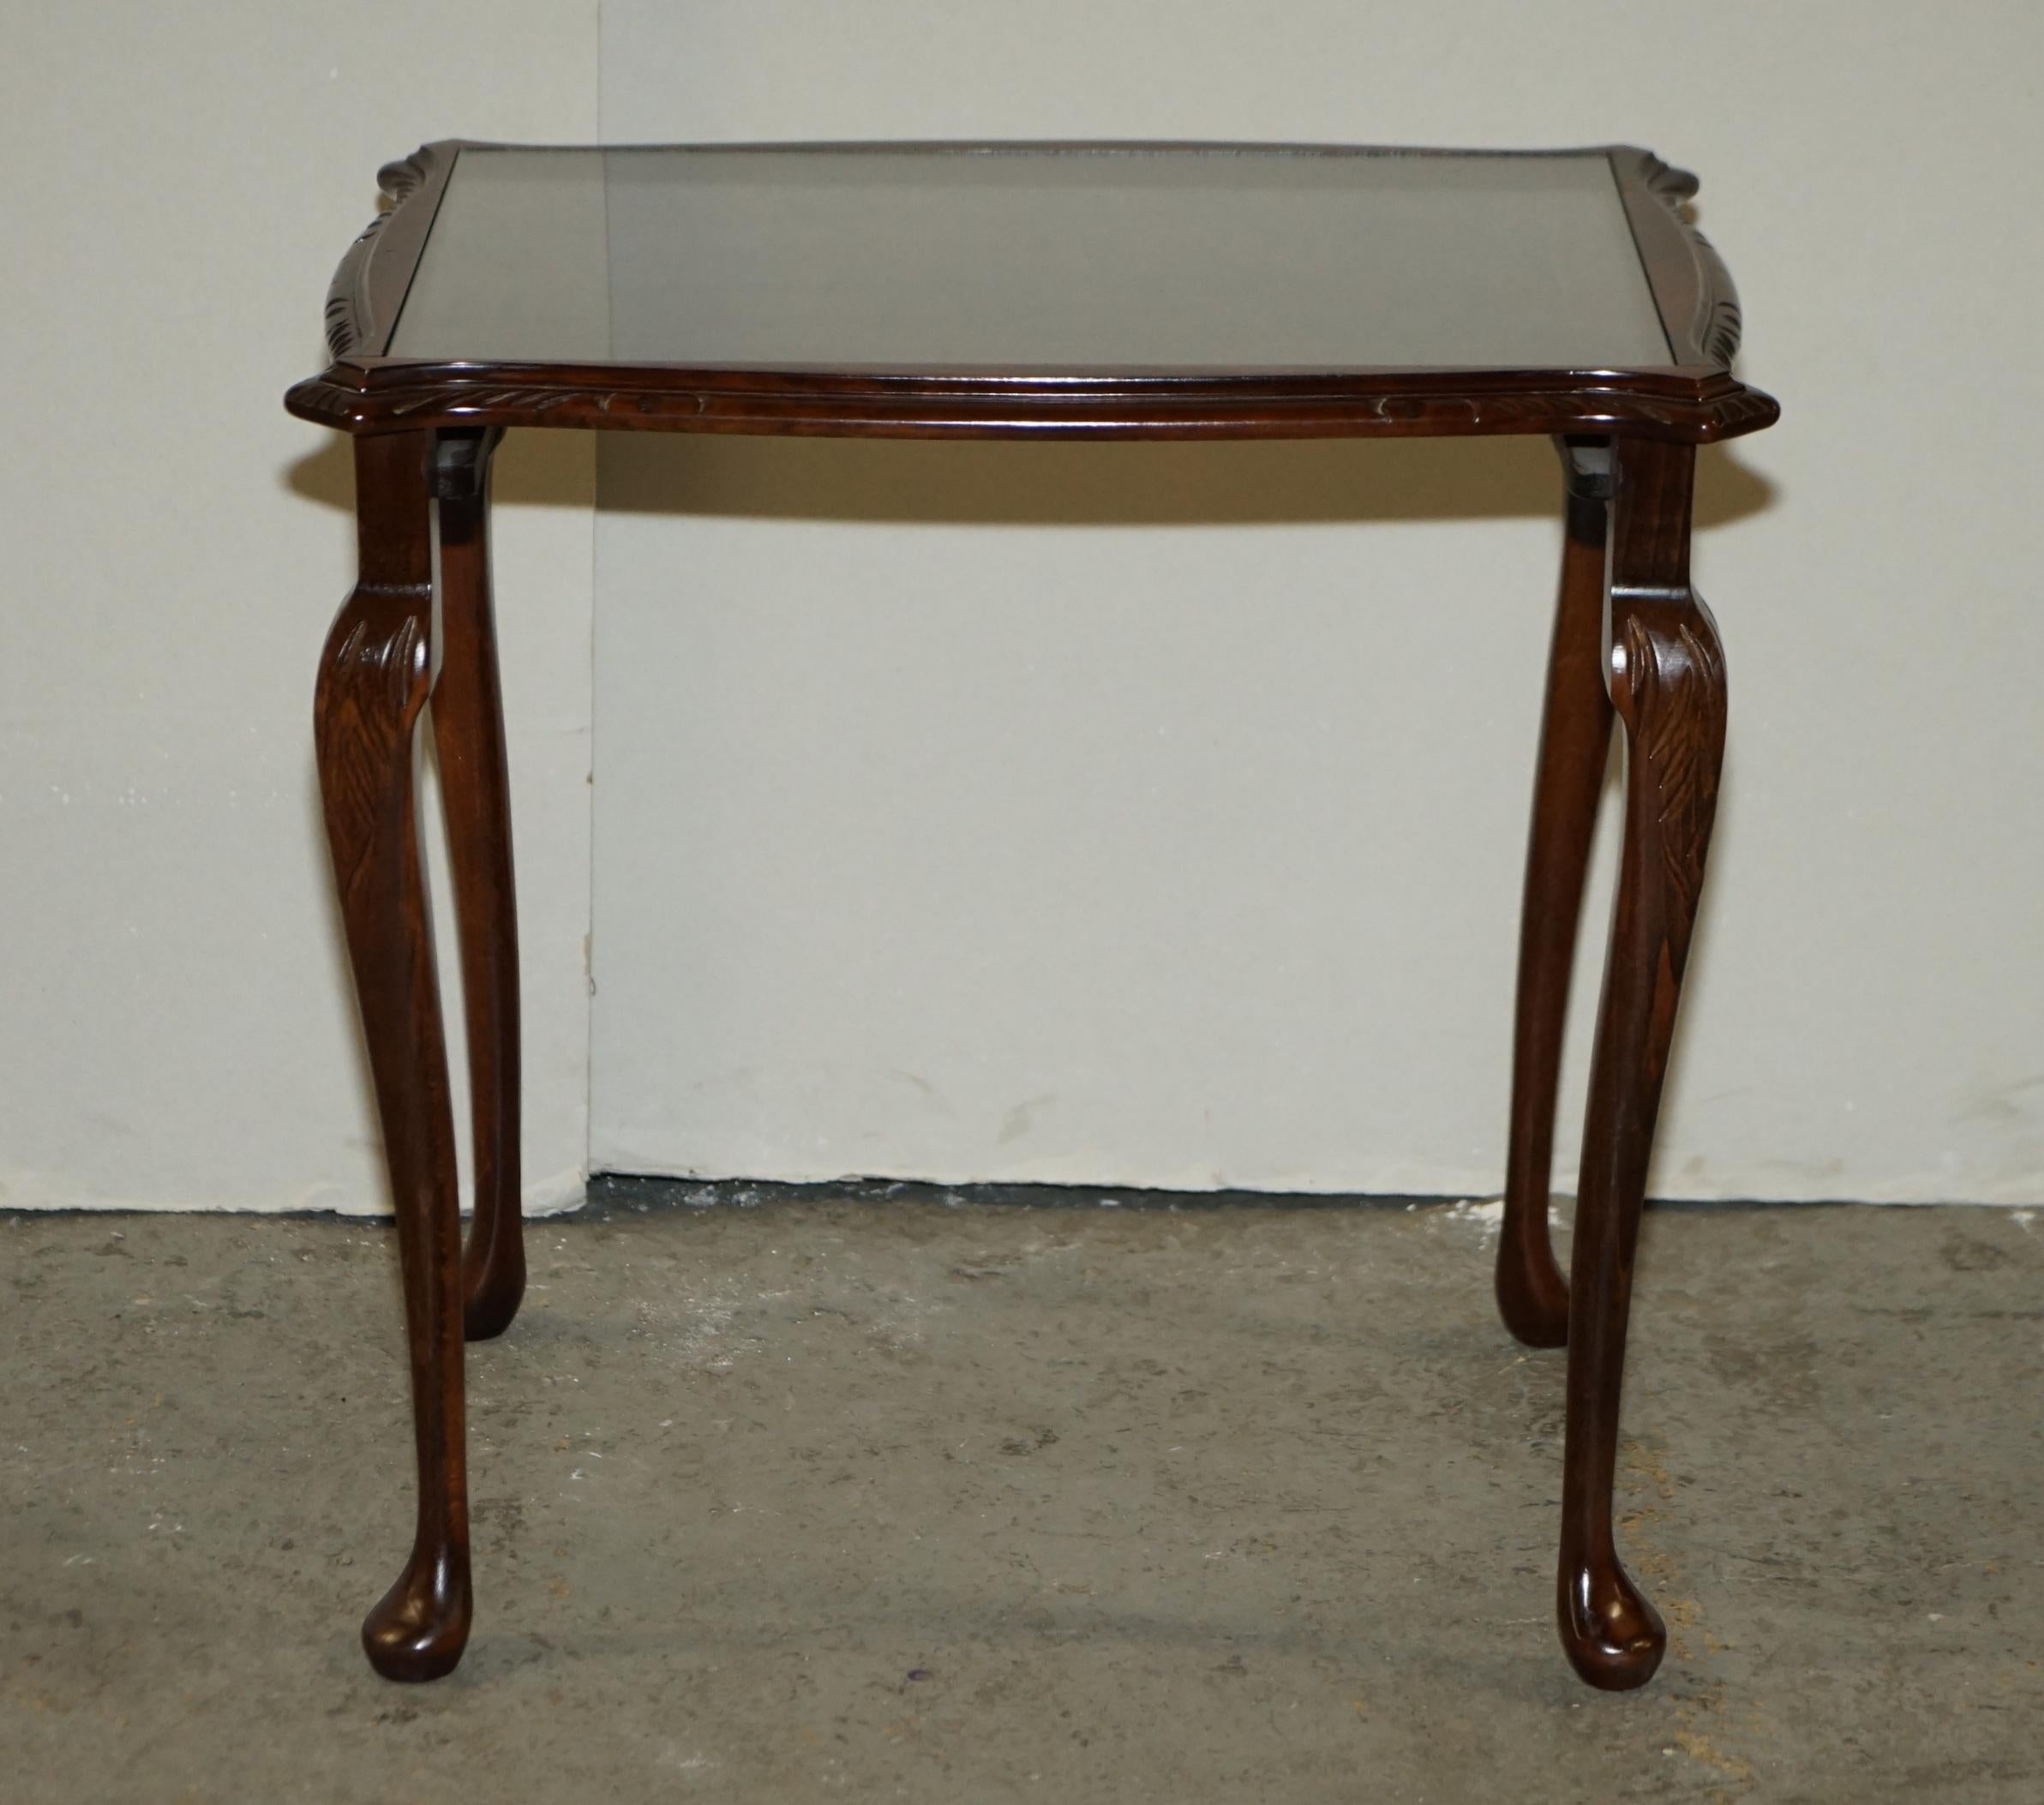 Hand-Crafted Vintage Nest of 3 Stacking Tables Solid Hardwood, Glass Tops & Carved Legs